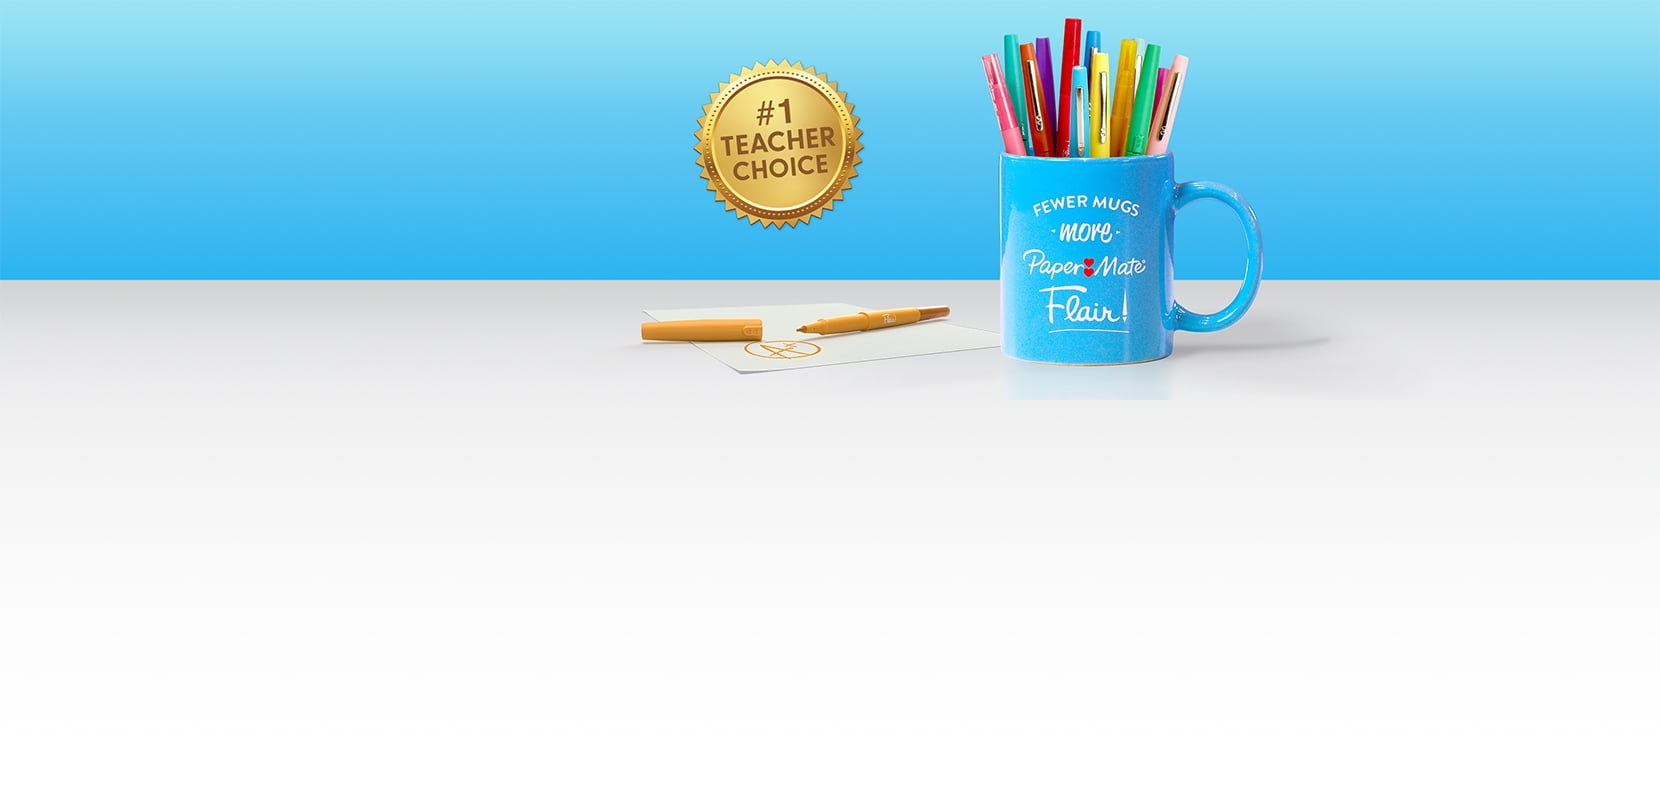 A blue Paper Mate Flair branded cup with Paper Mate Flair pens in it sits atop a desk with a Number One Teacher Choice medallion on the side.